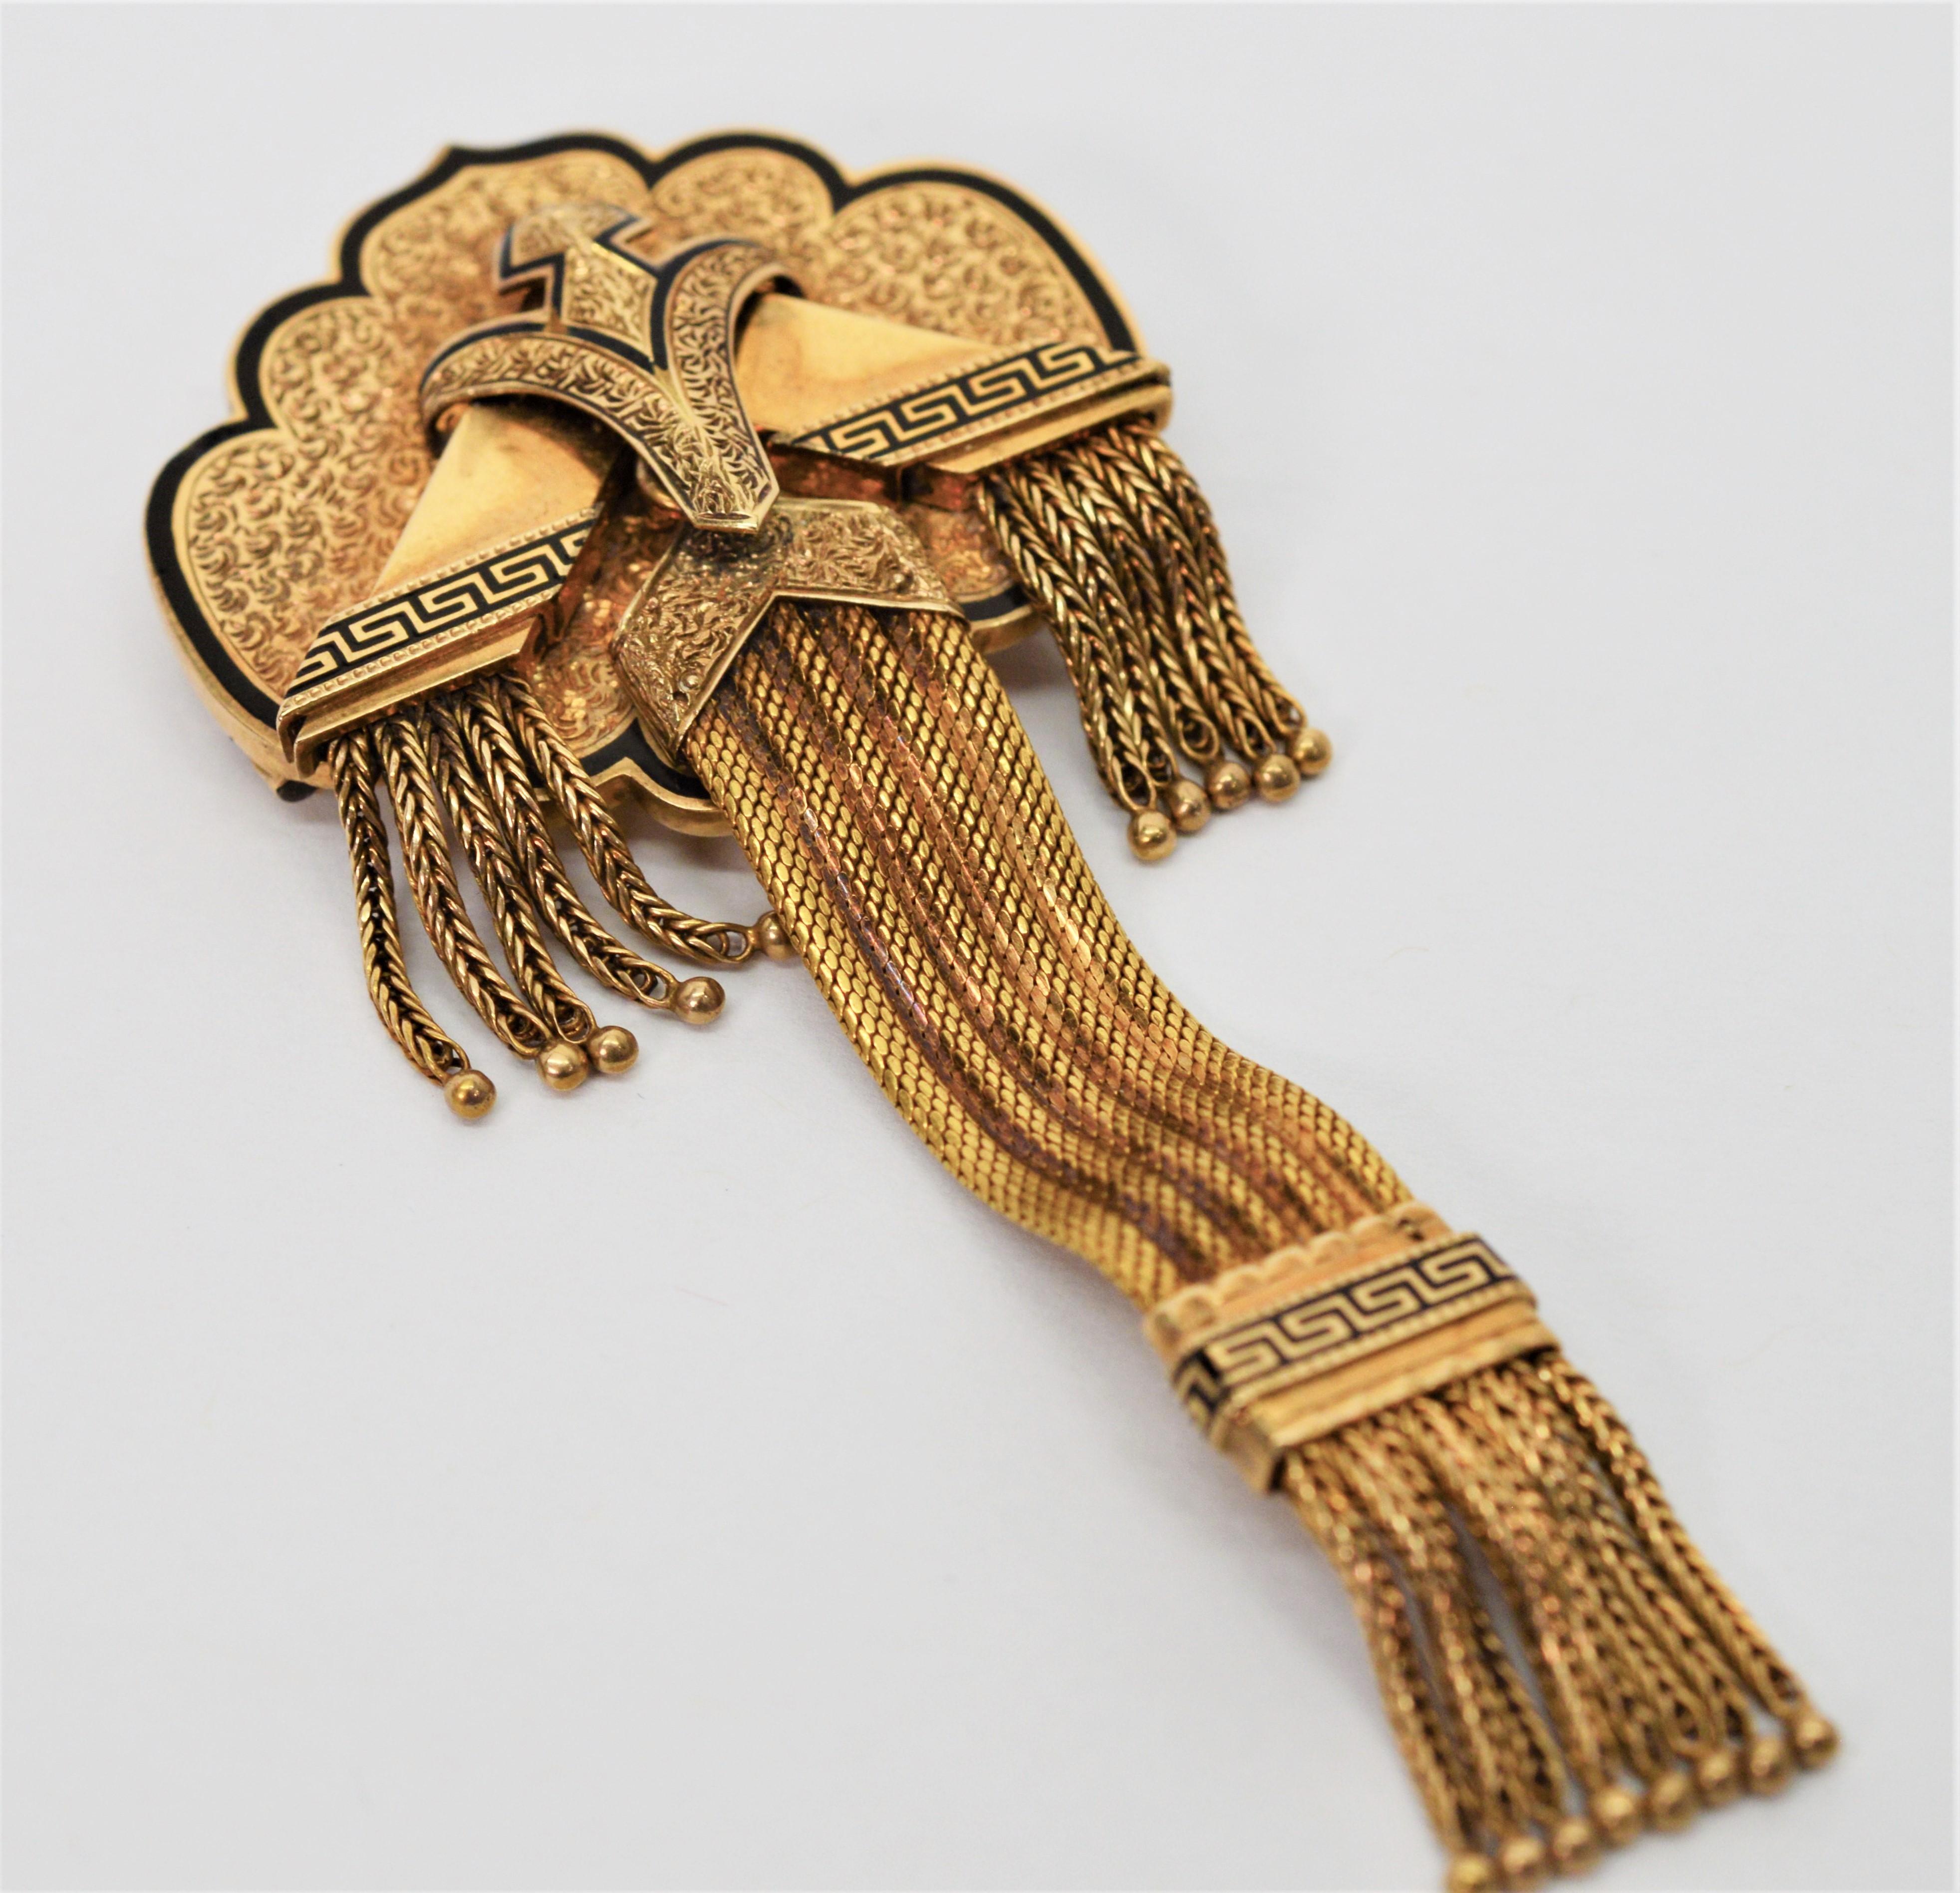 In fourteen carat yellow gold and looking very regal with braided tassels and black enamel accents, this Civil War era pin brooch makes a unique
accessory to a blazer or lapel.  Artfully hand engraved and crafted with three dimensions, the use of